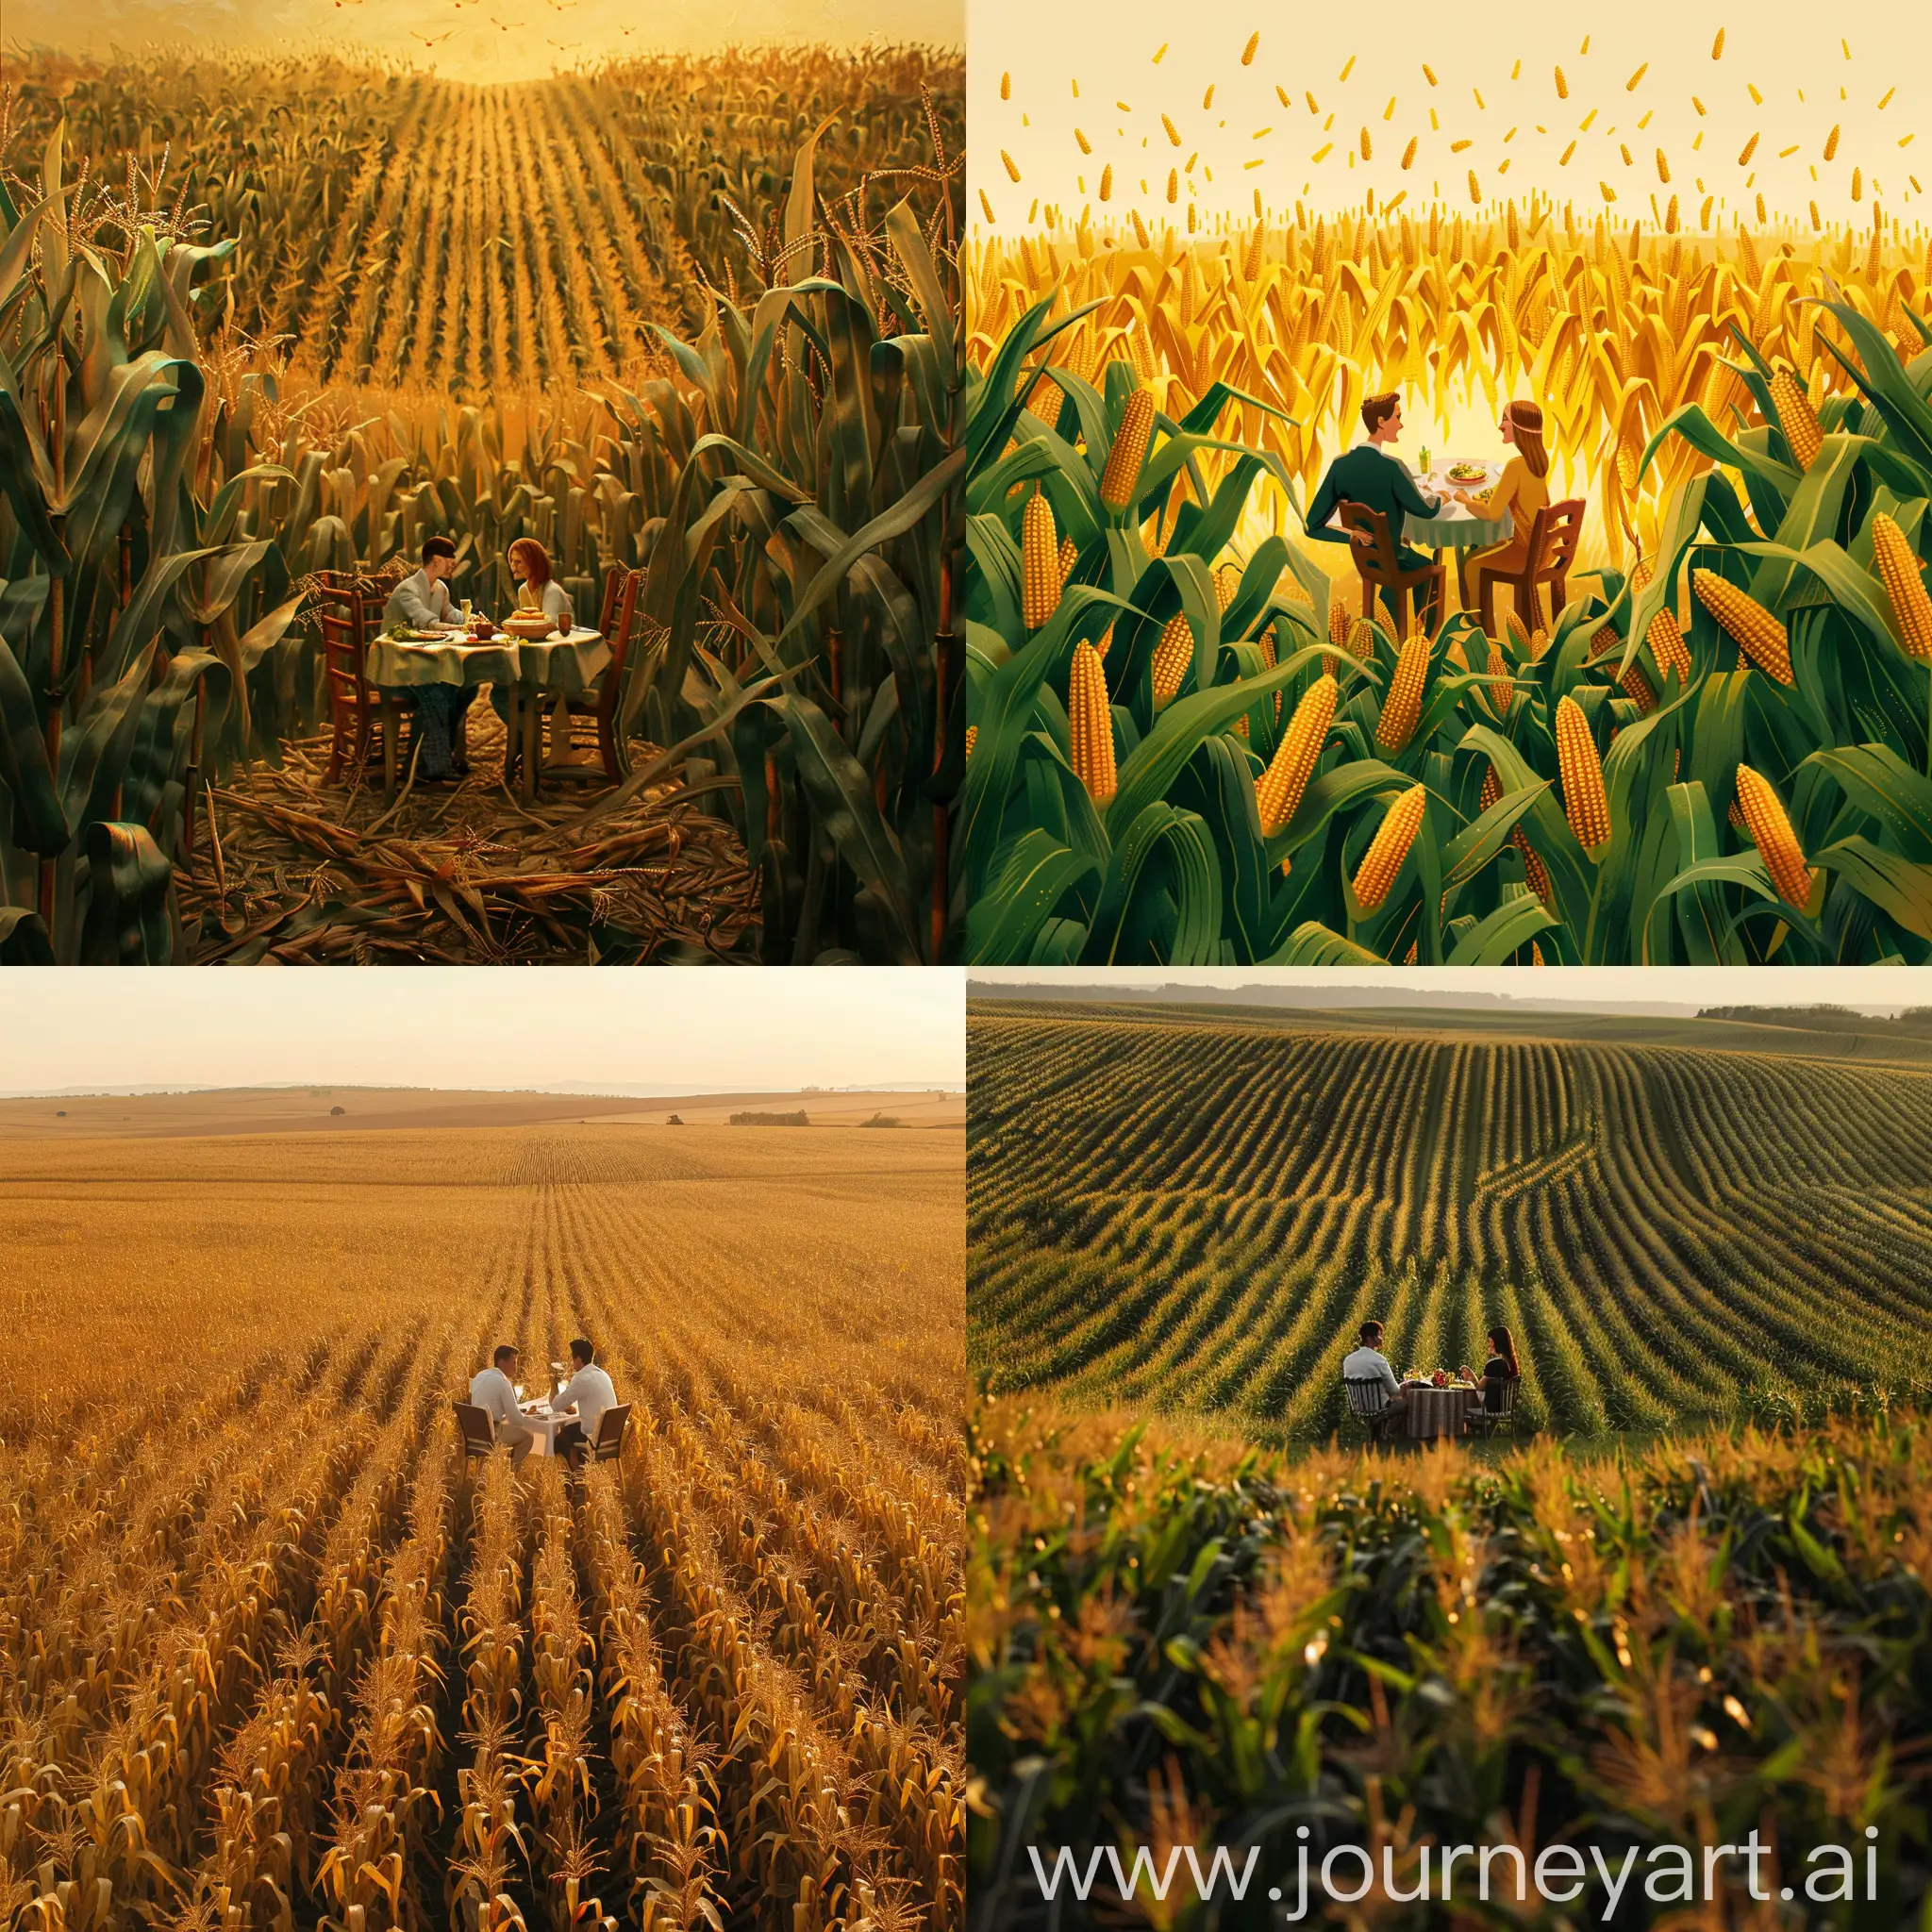 A beautiful field of corn and in the middle a happy couple at a table having dinner